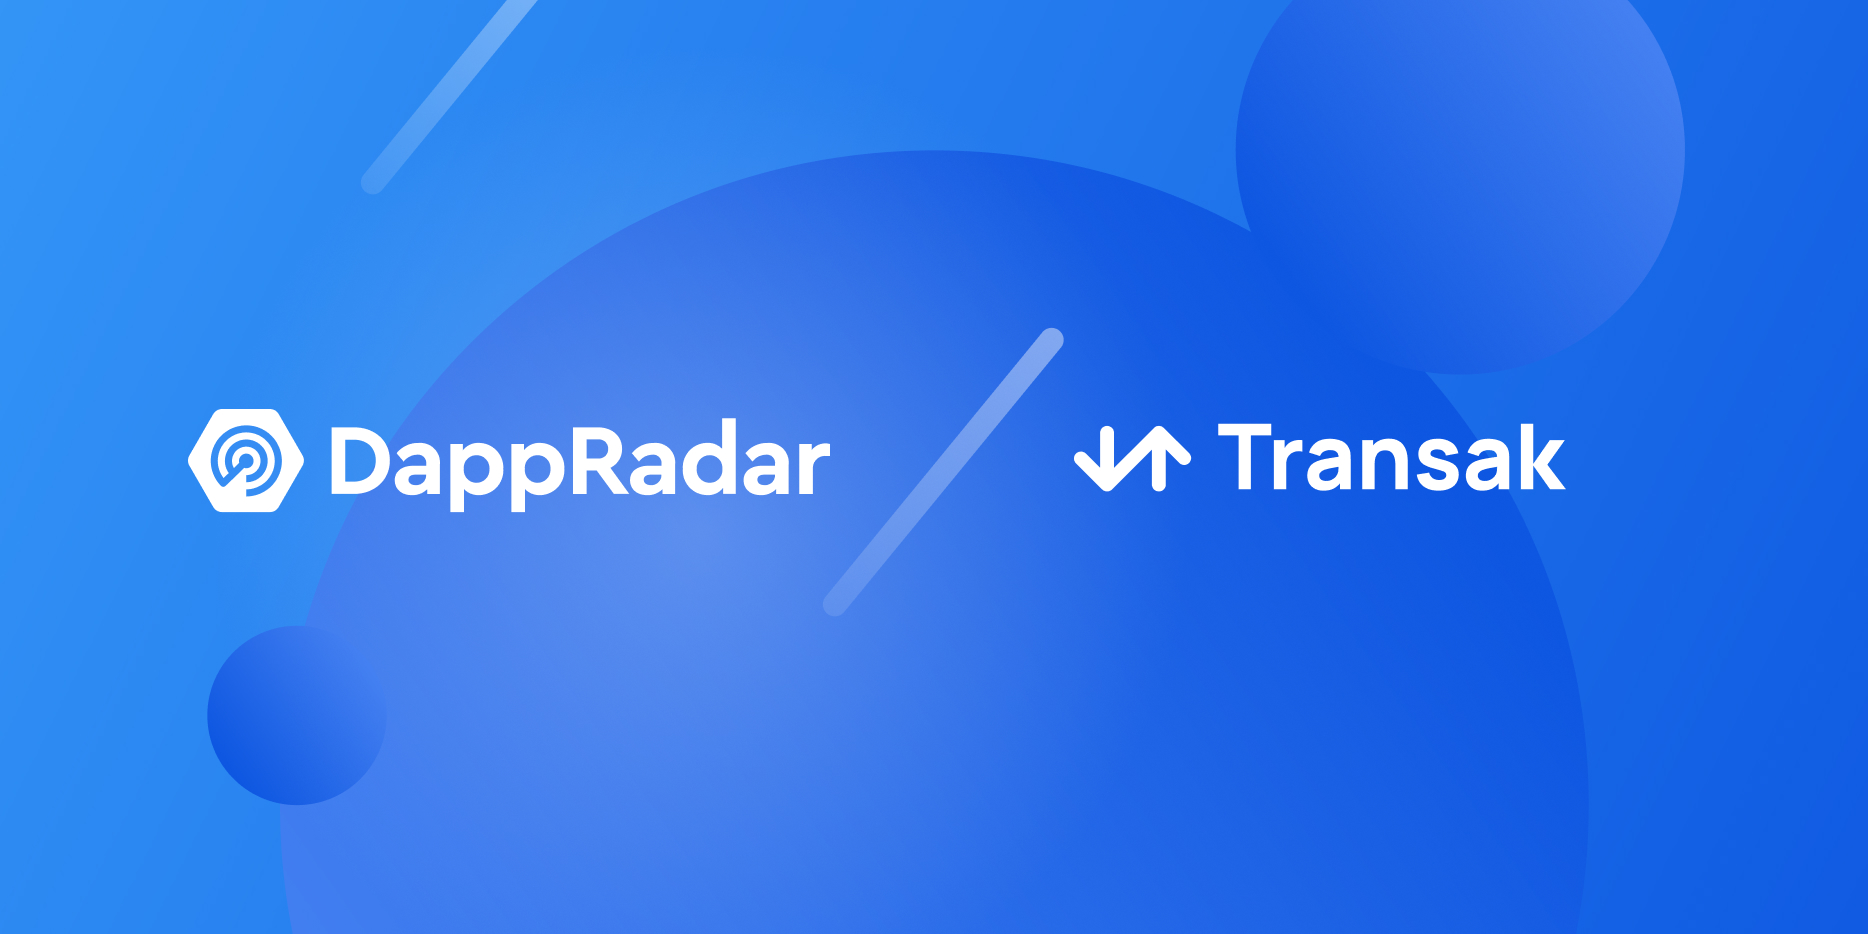 Now you can buy 130+ cryptocurrencies directly on DappRadar using Transak and pay with any local payment method